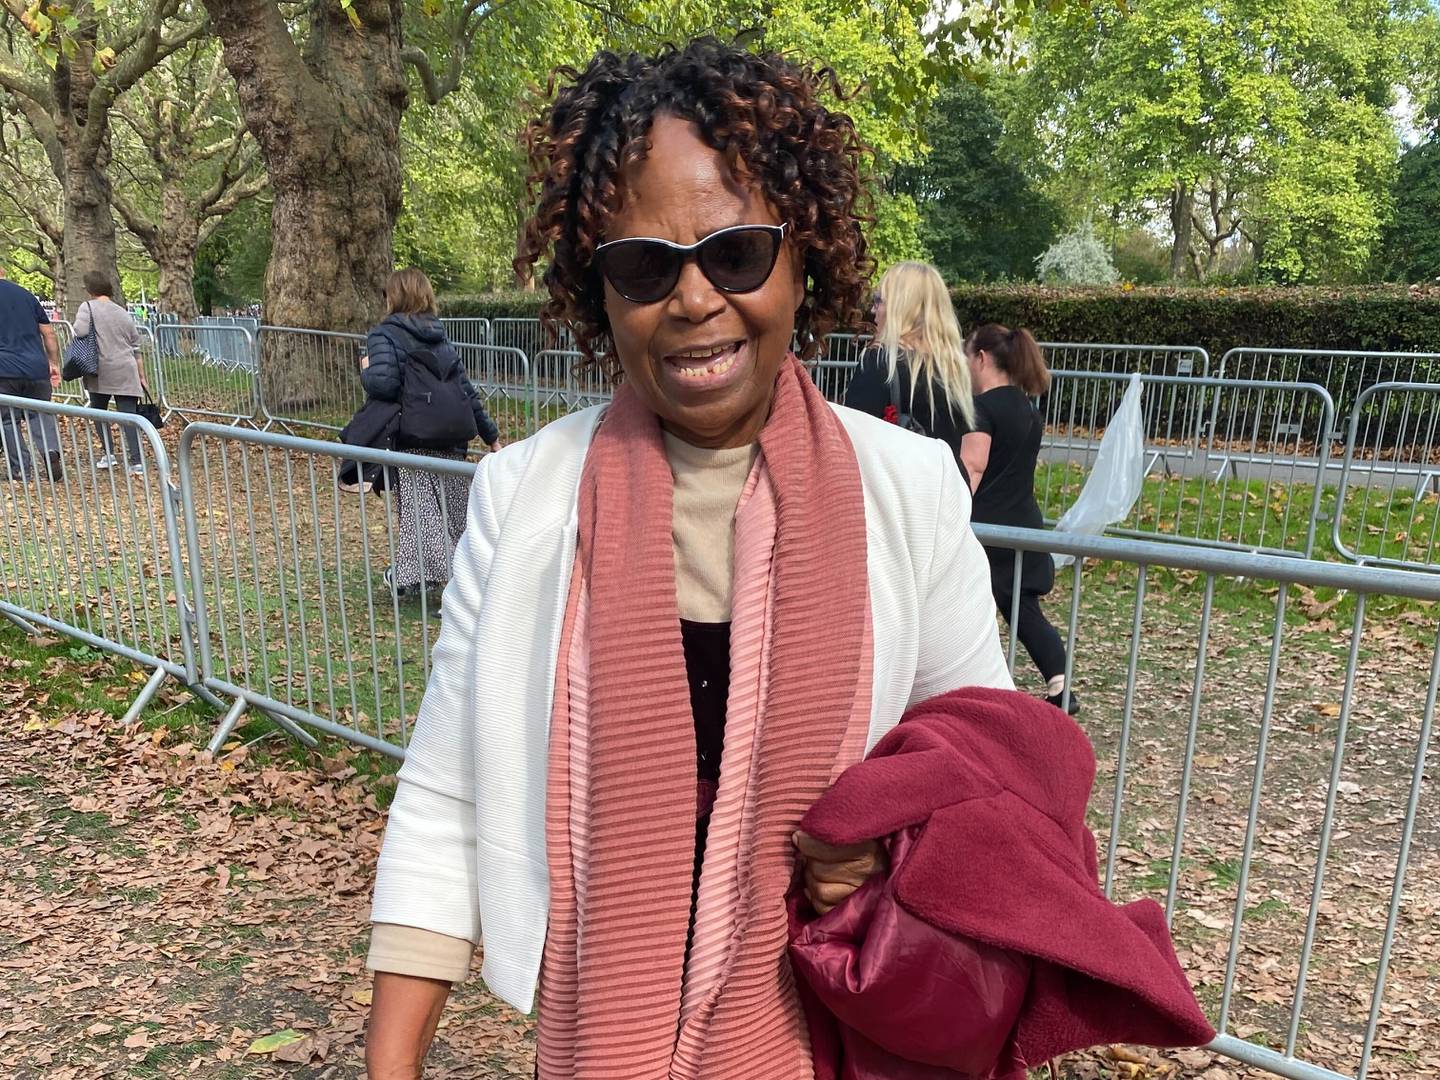 Otiliah Nyamande, 71, travelled from Zimbabwe to see the queen lying in state. Gillian Duncan / The National